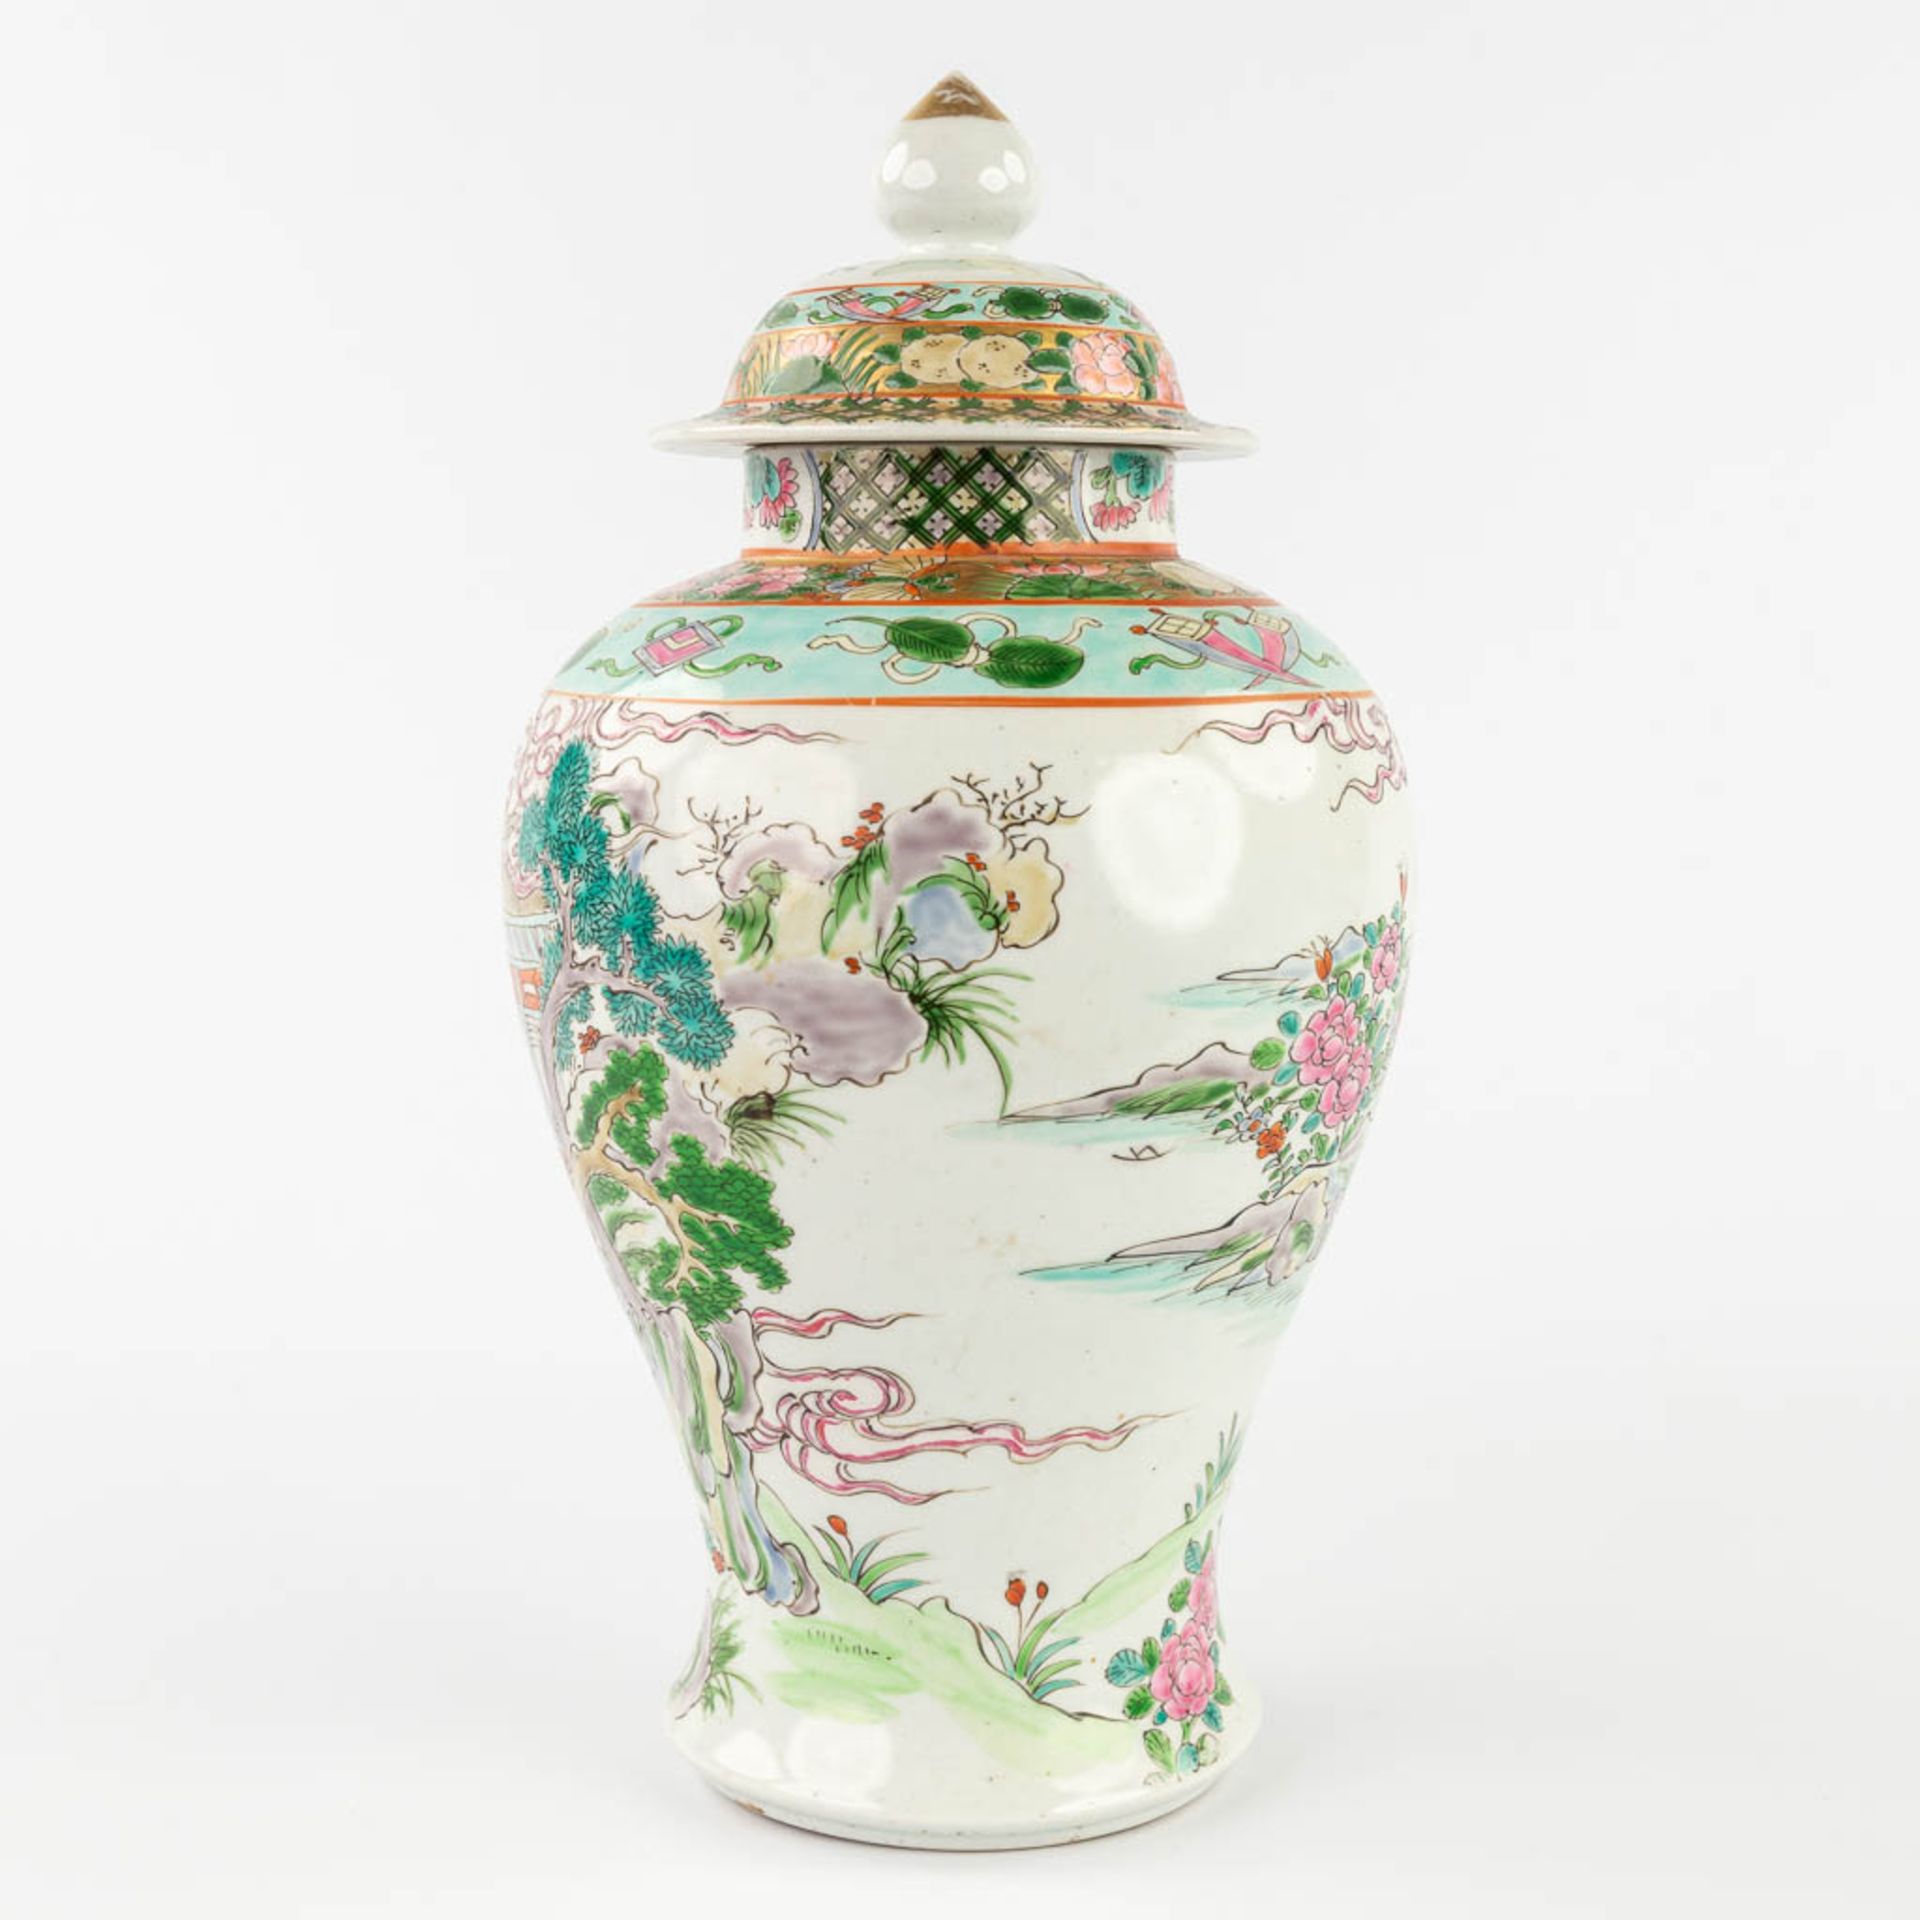 A Japanese baluster vase with lid, decorated with ladies and landscapes. (H:35 x D:18 cm) - Image 4 of 14